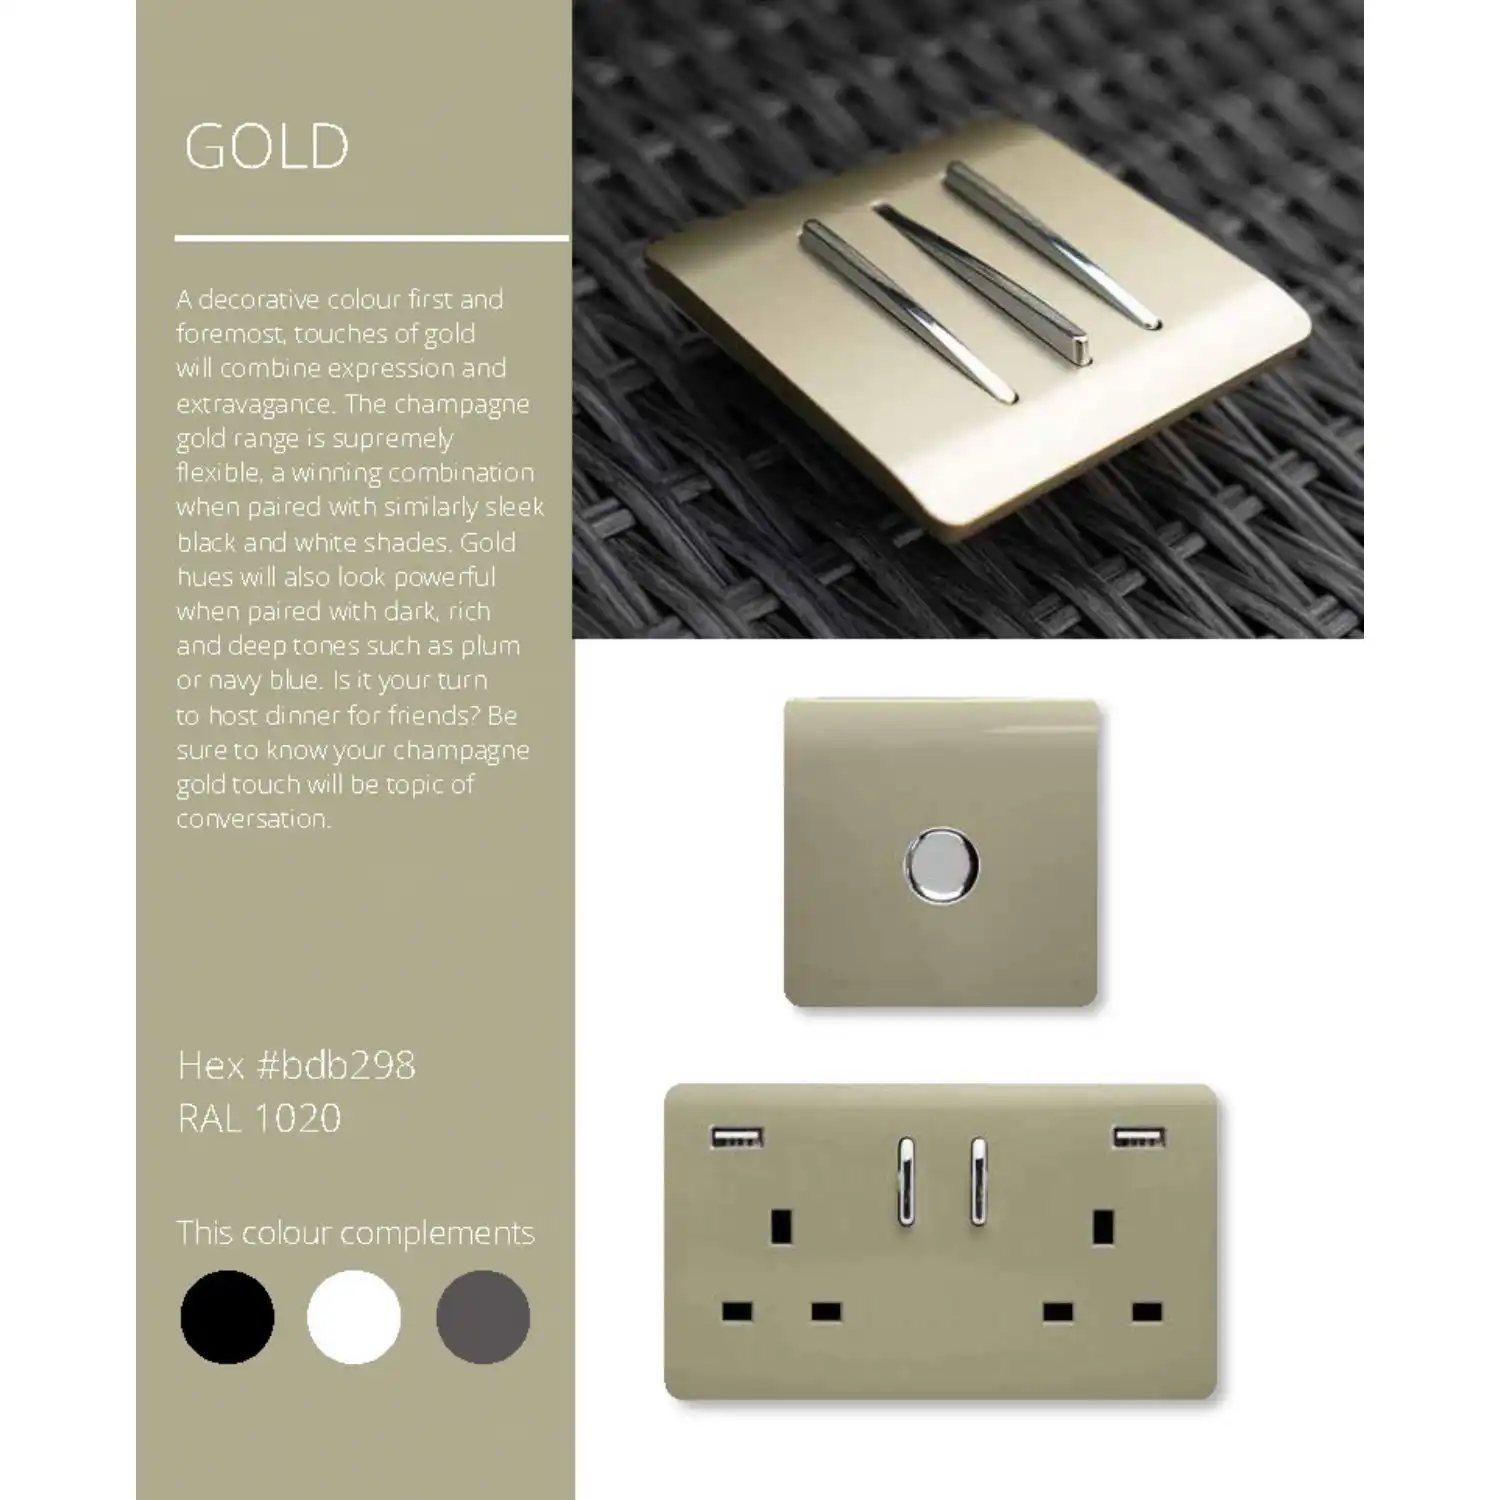 Trendi, Artistic Modern 1 Gang 13Amp Switched Socket Champagne Gold Finish, BRITISH MADE, (25mm Back Box Required), 5yrs Warranty